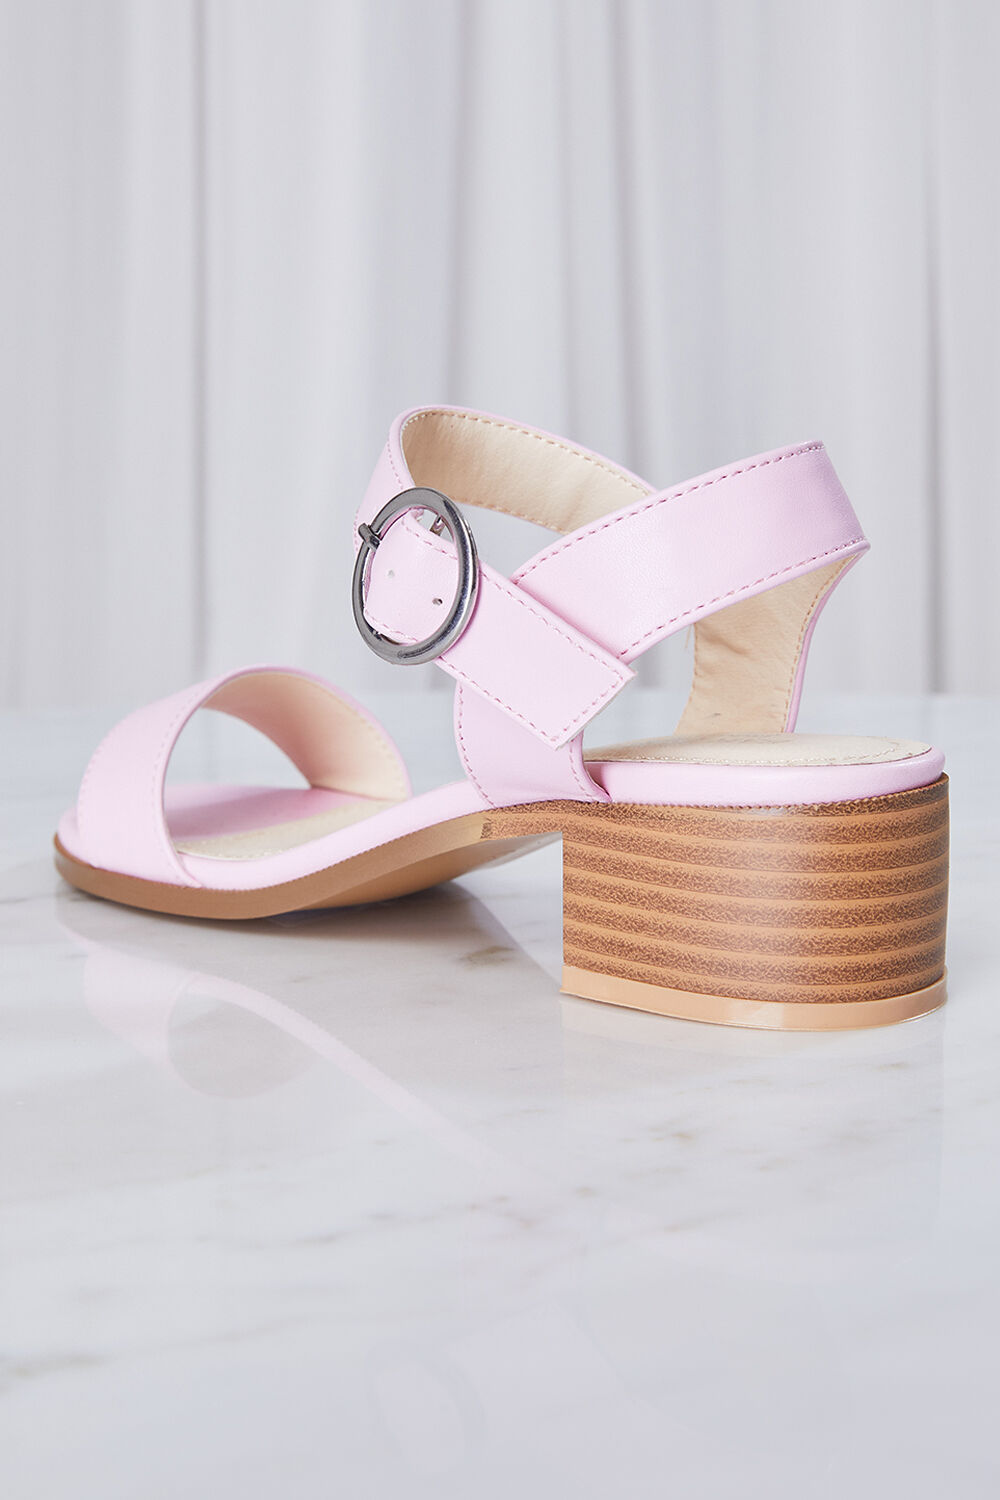 BUCKLE HEEL in colour PARADISE PINK